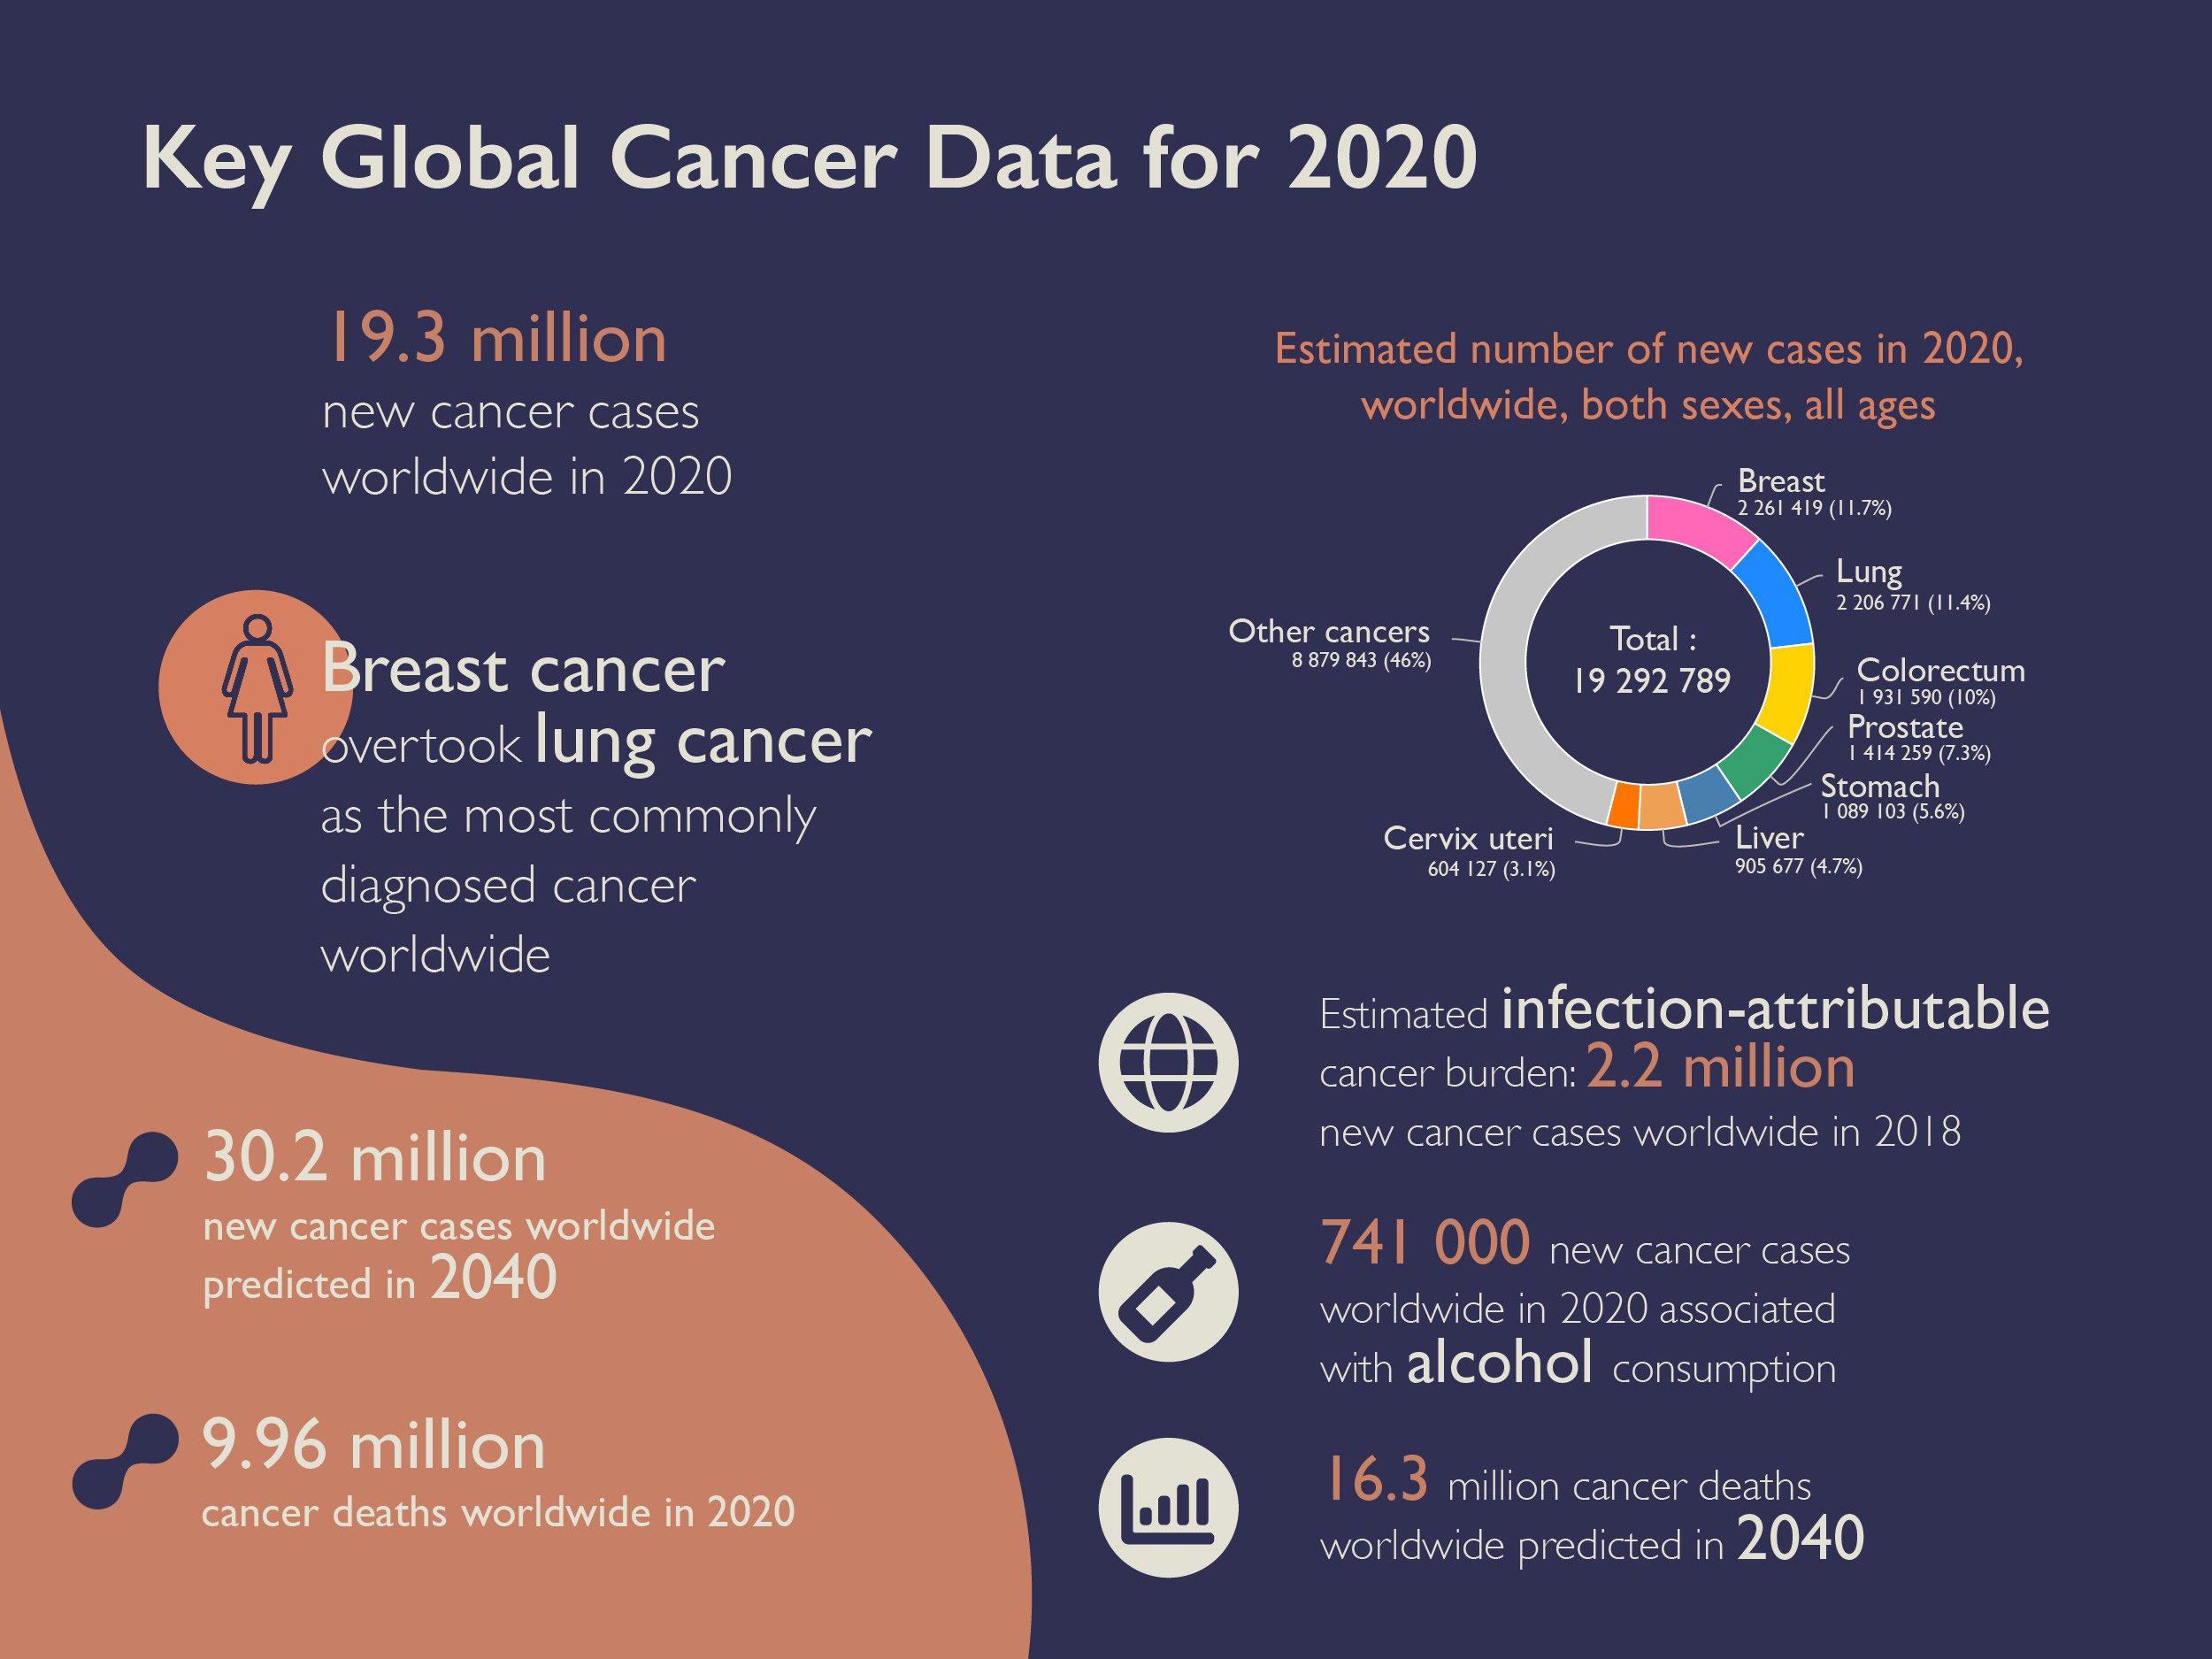 international agency for research on cancer (iarc)